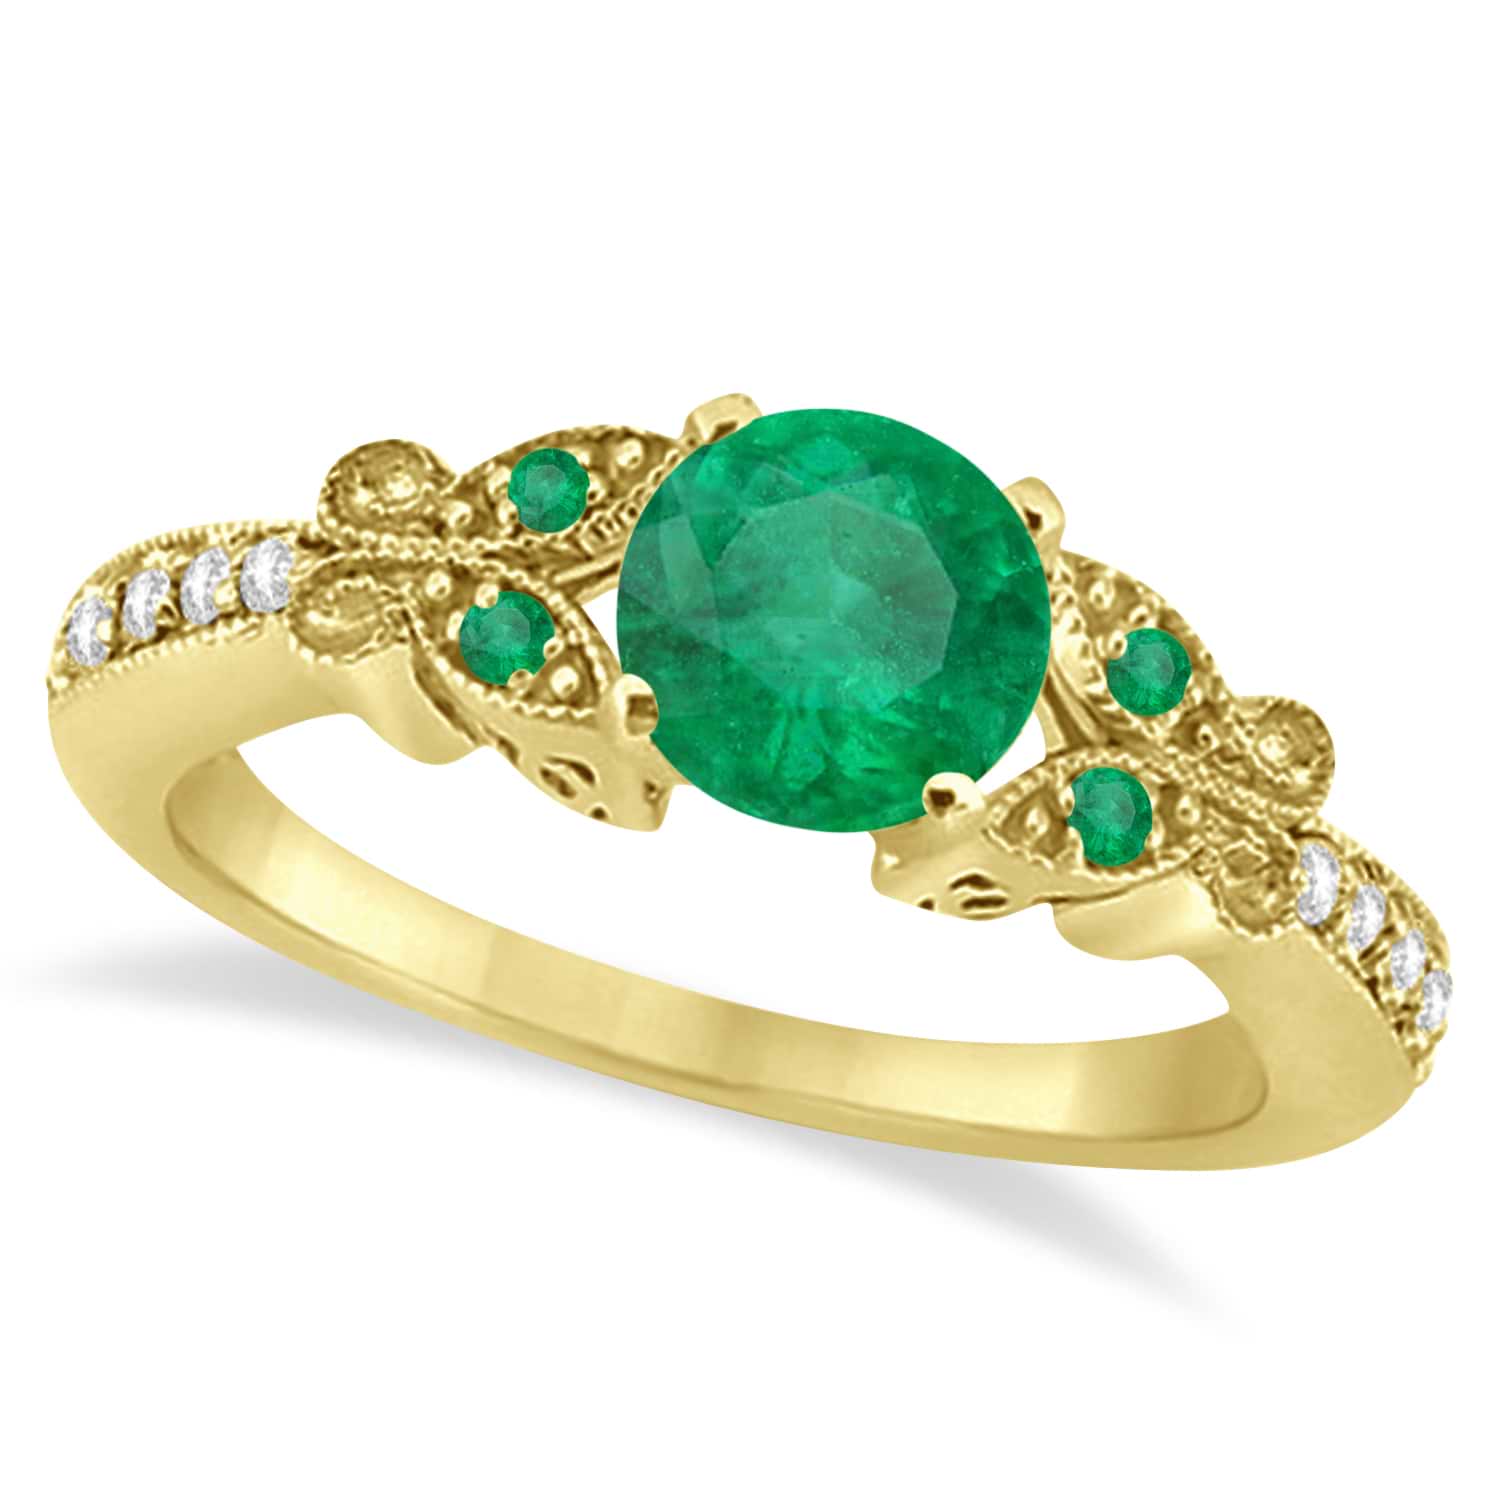 Butterfly Genuine Emerald & Diamond Engagement Ring 18K Yellow Gold 1.11ct